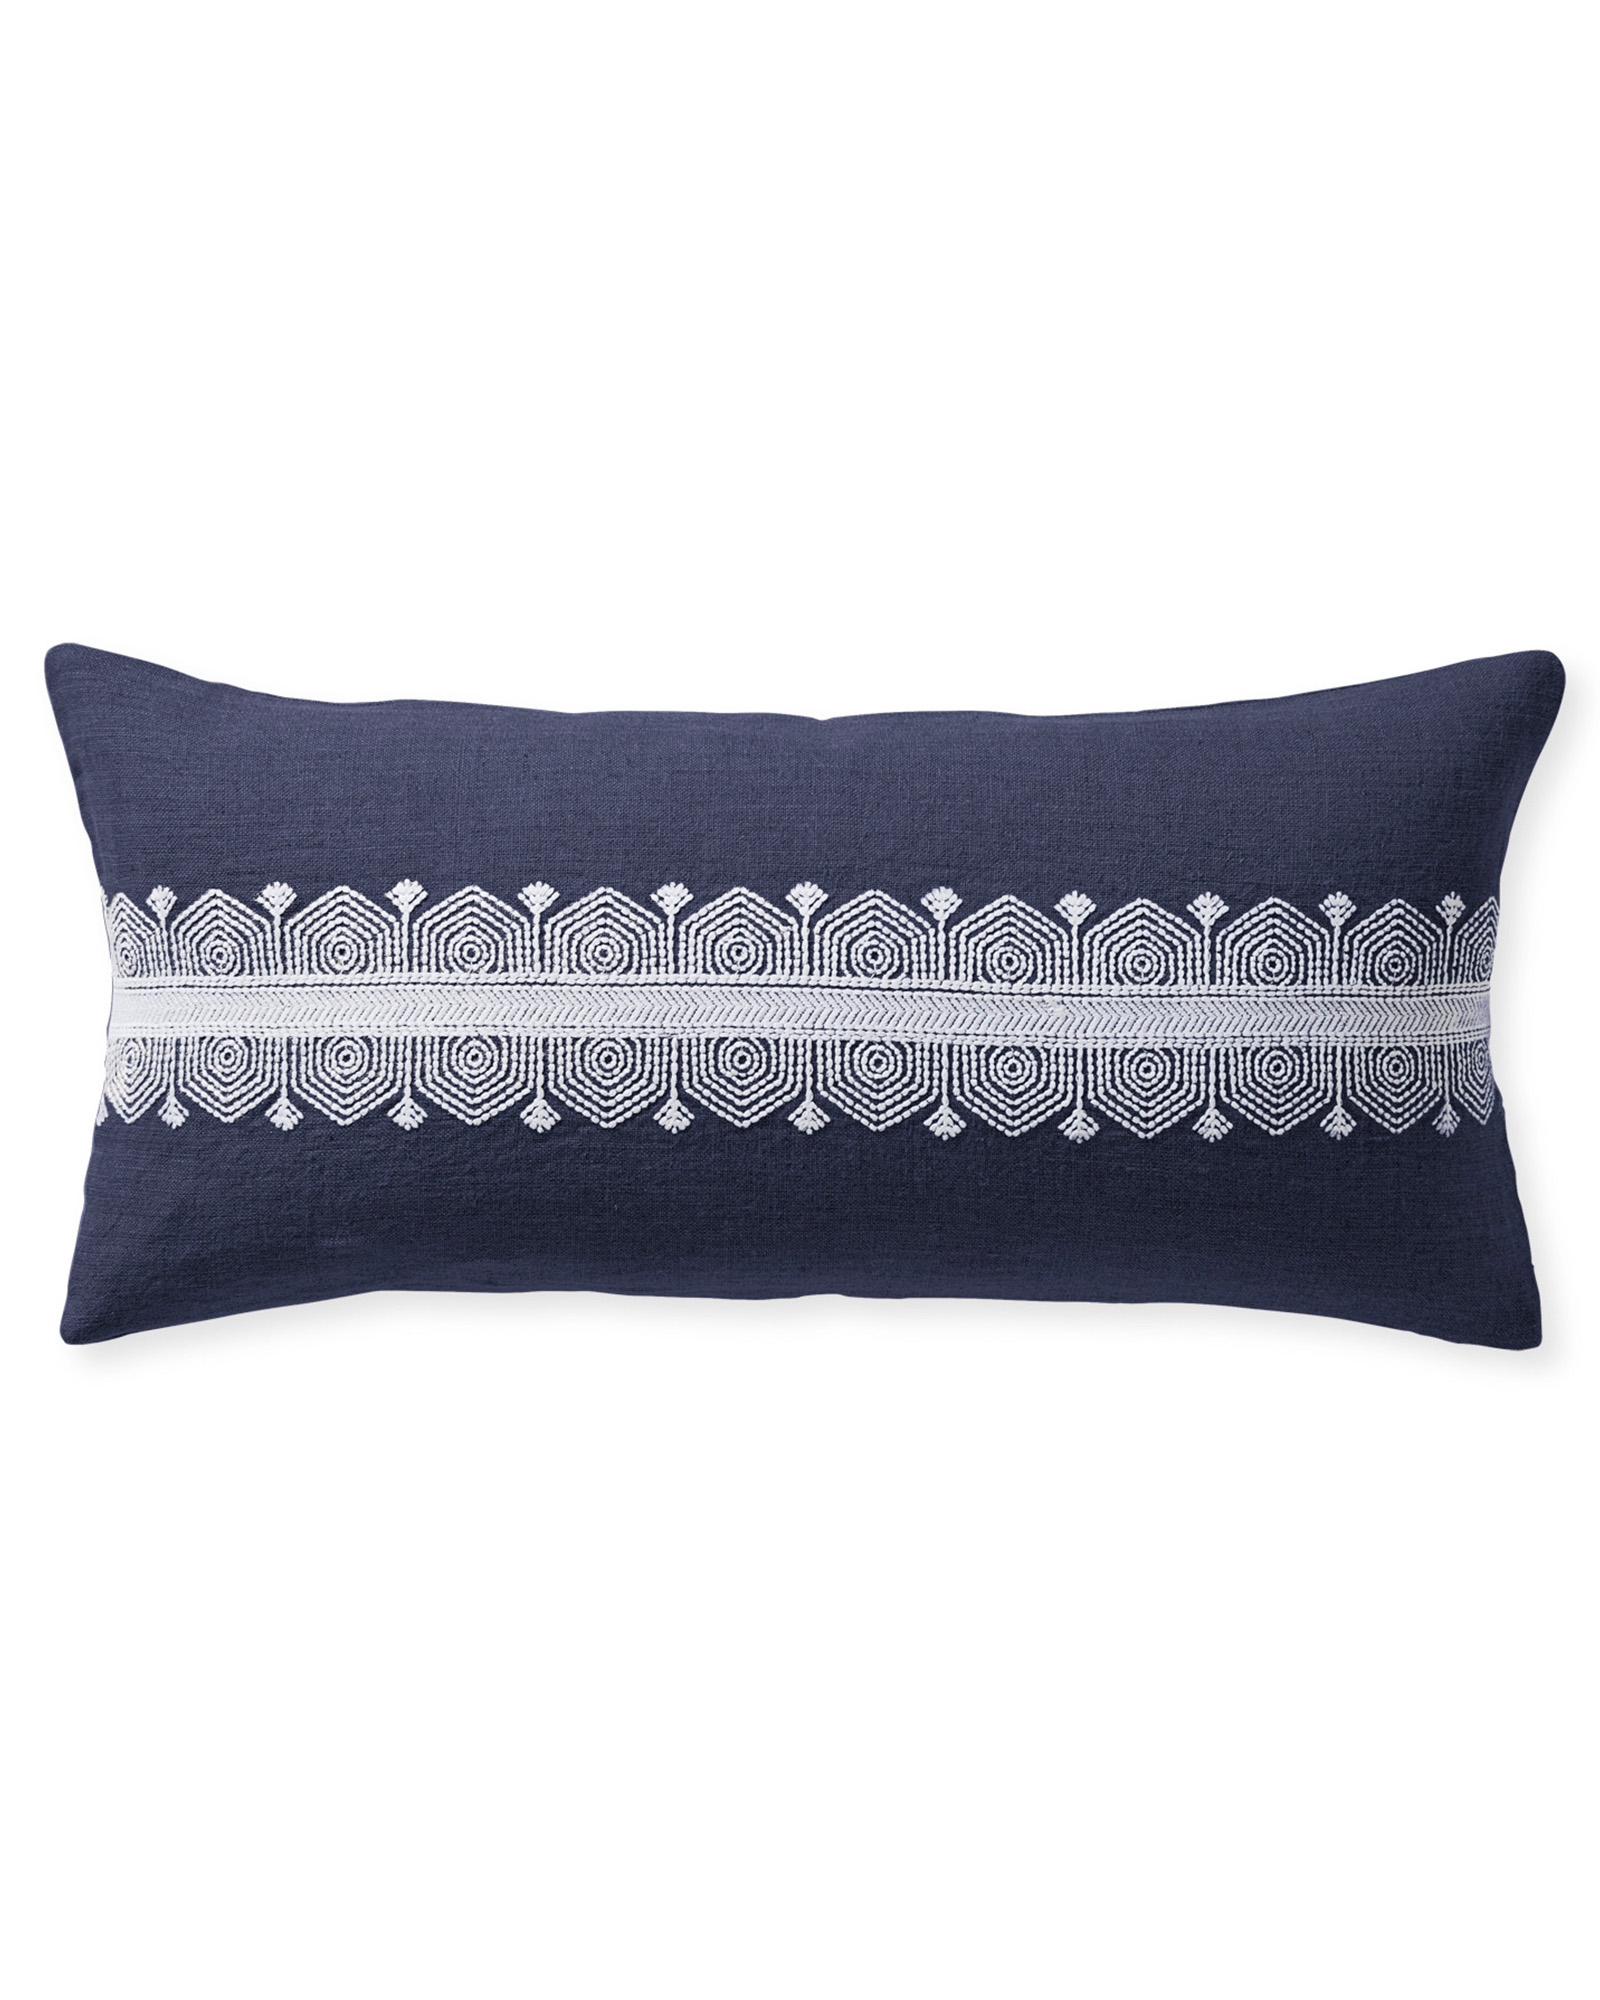 Olympia 14" x 30" Pillow Cover - Navy - Insert sold separately - Image 0